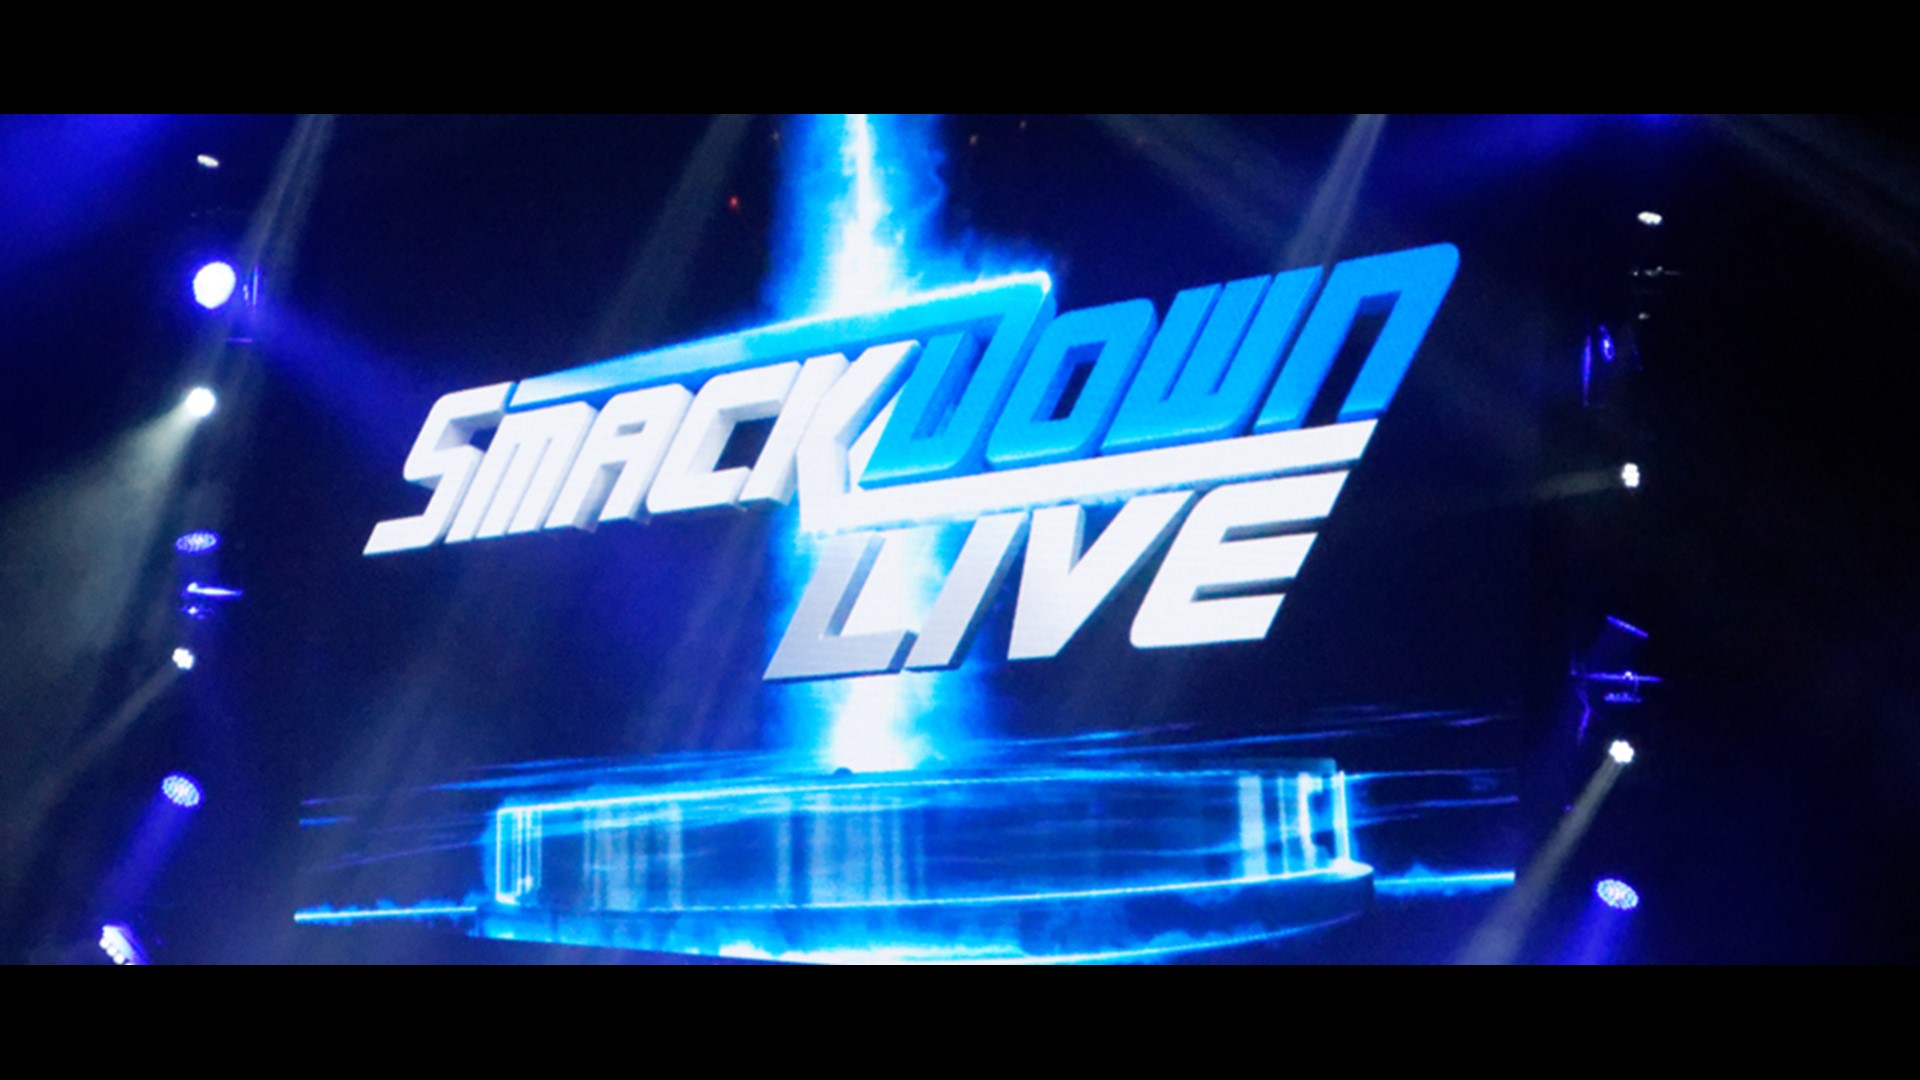 WWE SmackDown Live coming to Indianapolis